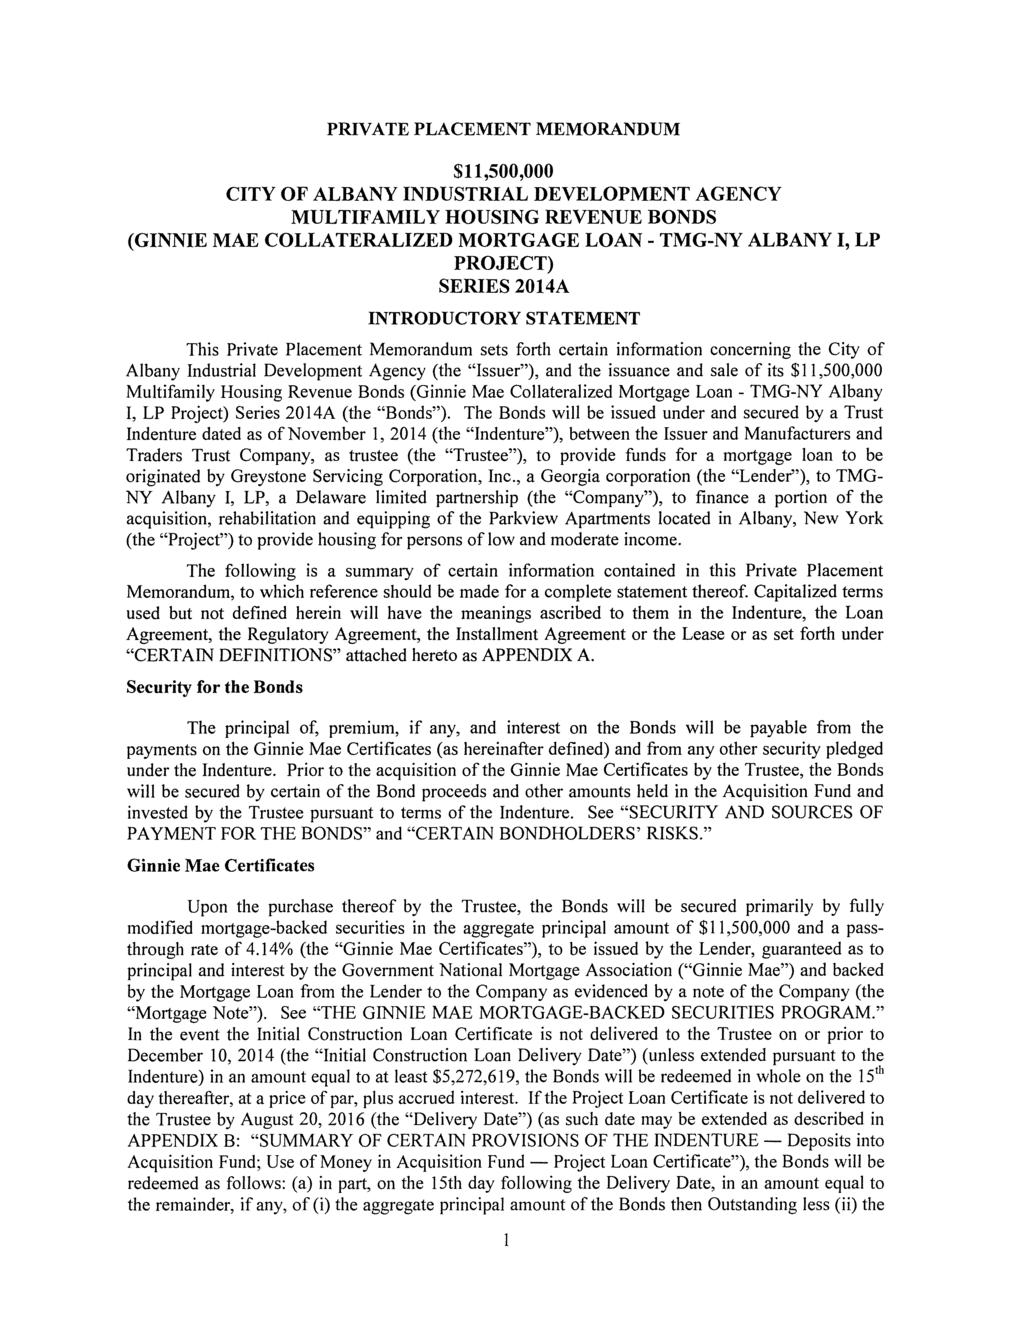 PRIVATE PLACEMENT MEMORANDUM $11,500,000 CITY OF ALBANY INDUSTRIAL DEVELOPMENT AGENCY MULTIFAMILY HOUSING REVENUE BONDS (GINNIE MAE COLLATERALIZED MORTGAGE LOAN - TMG-NY ALBANY I, LP PROJECT) SERIES